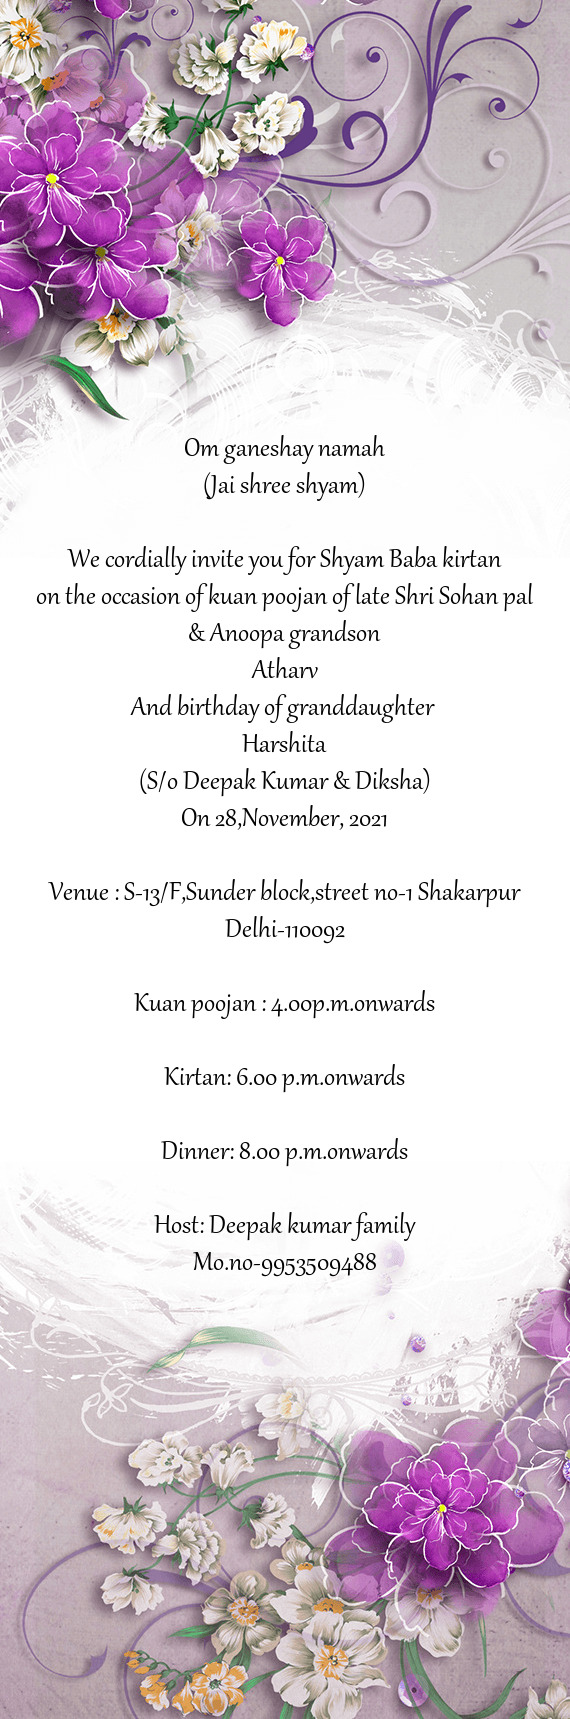 We cordially invite you for Shyam Baba kirtan